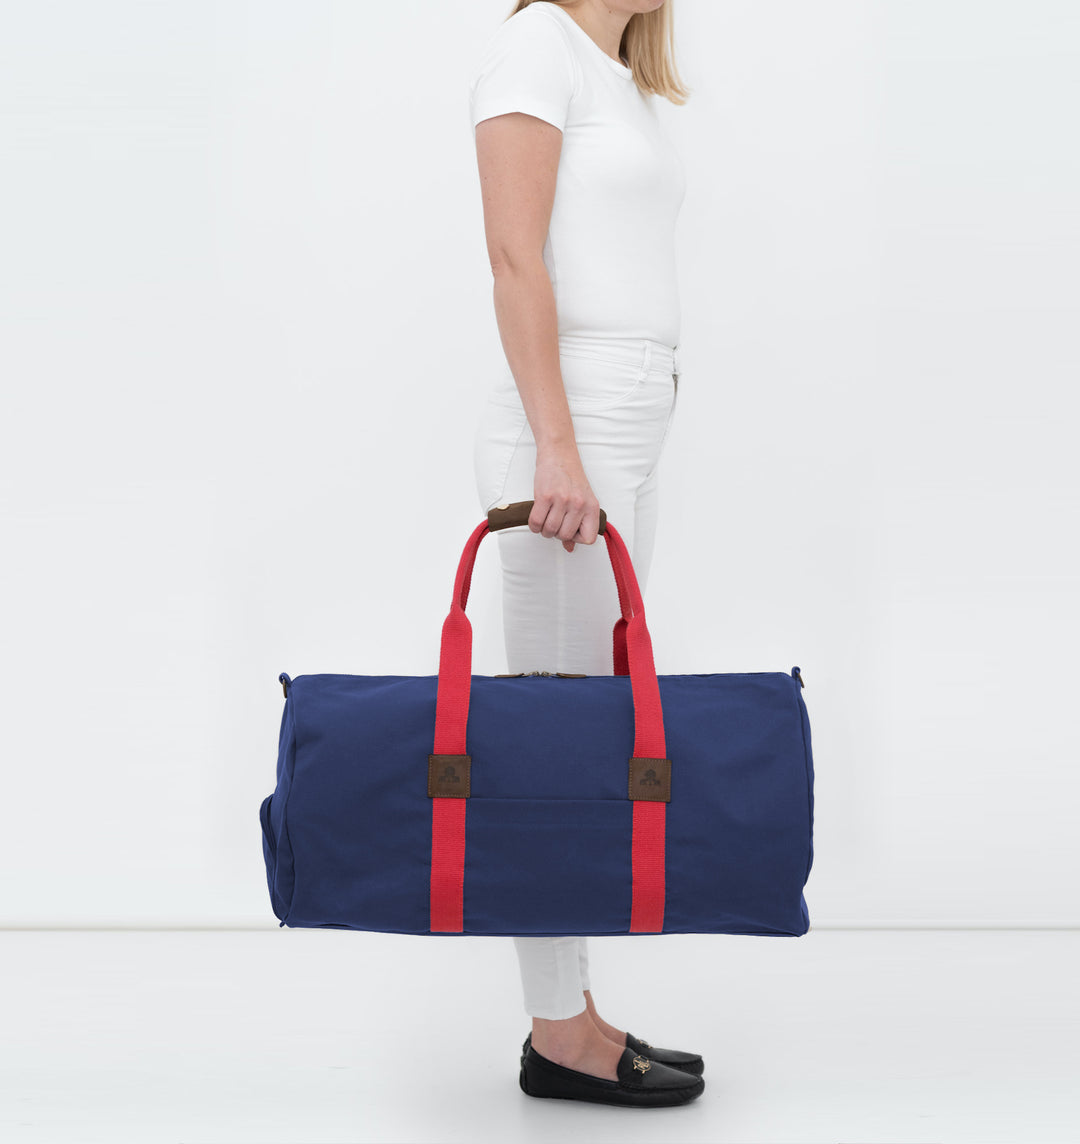 Dufflebag -L- NAVY with red strap